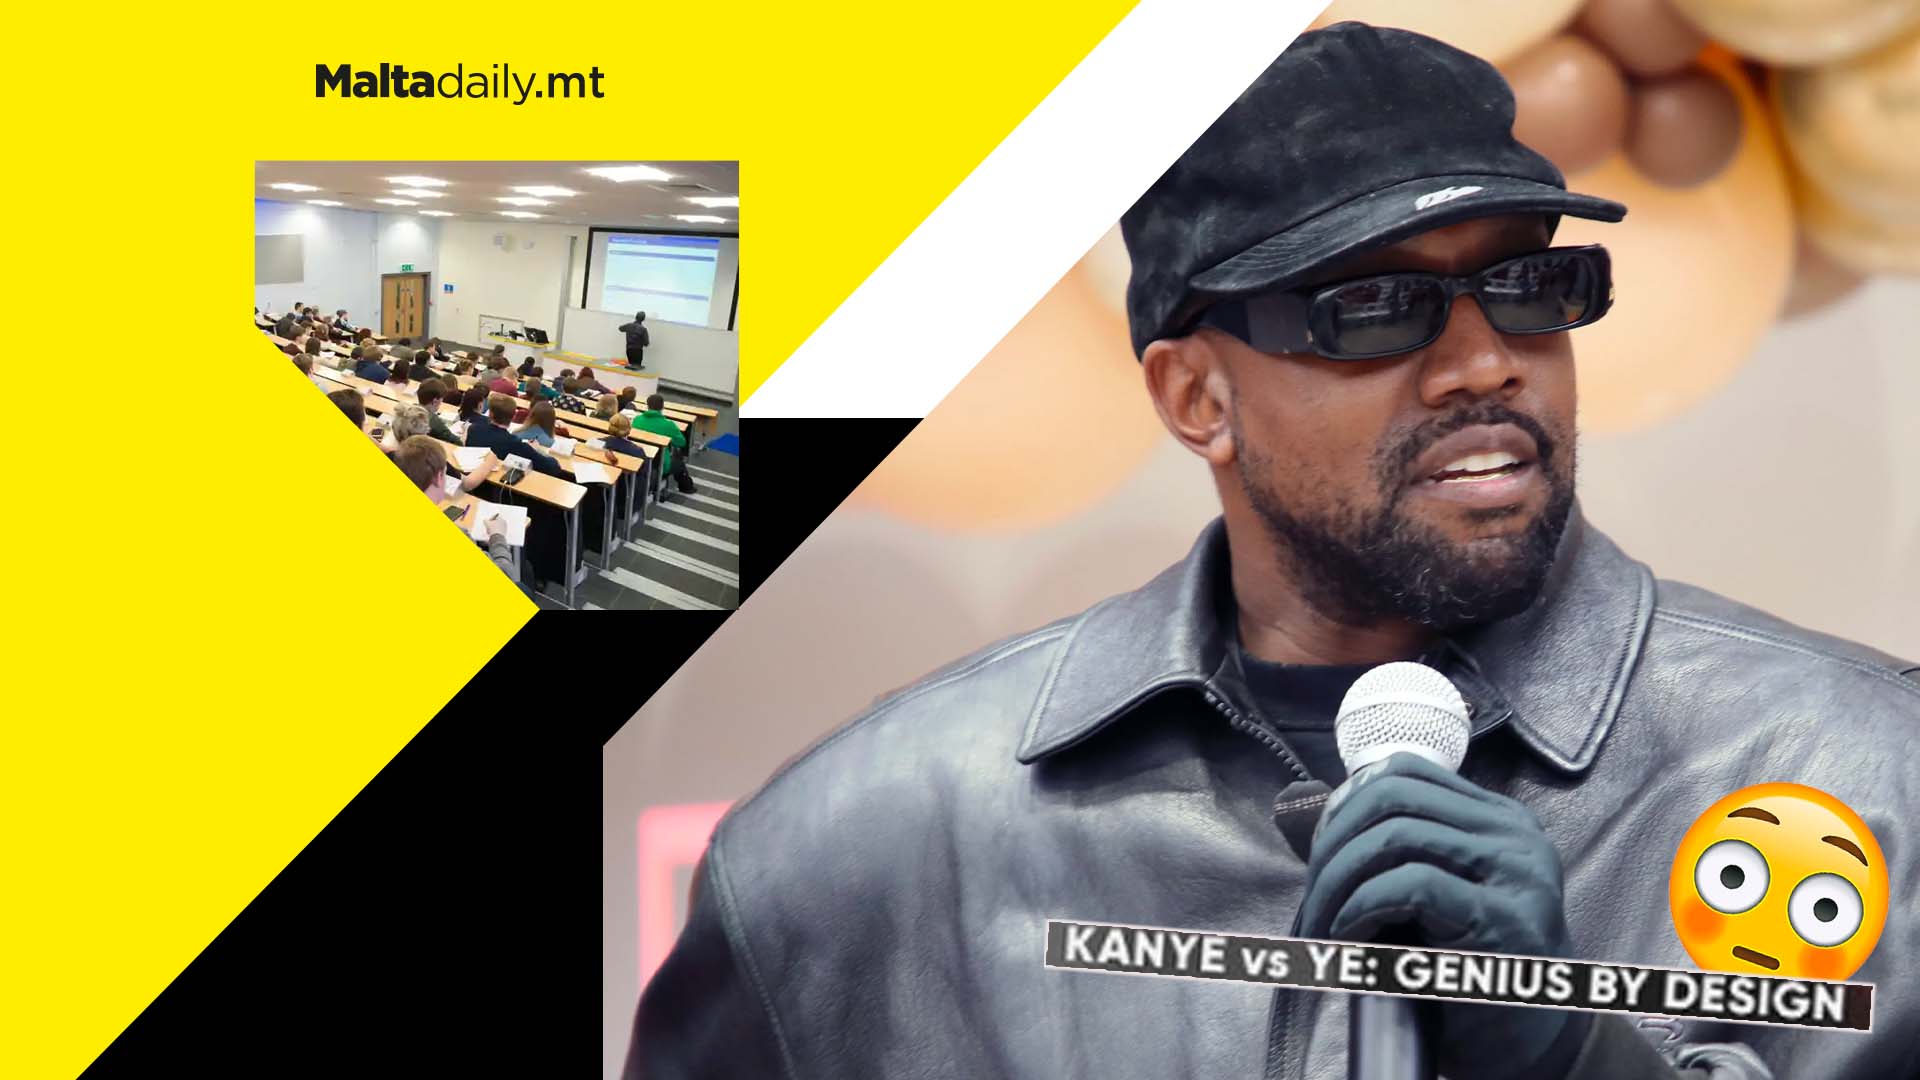 A university is offering an entire course on Kanye West